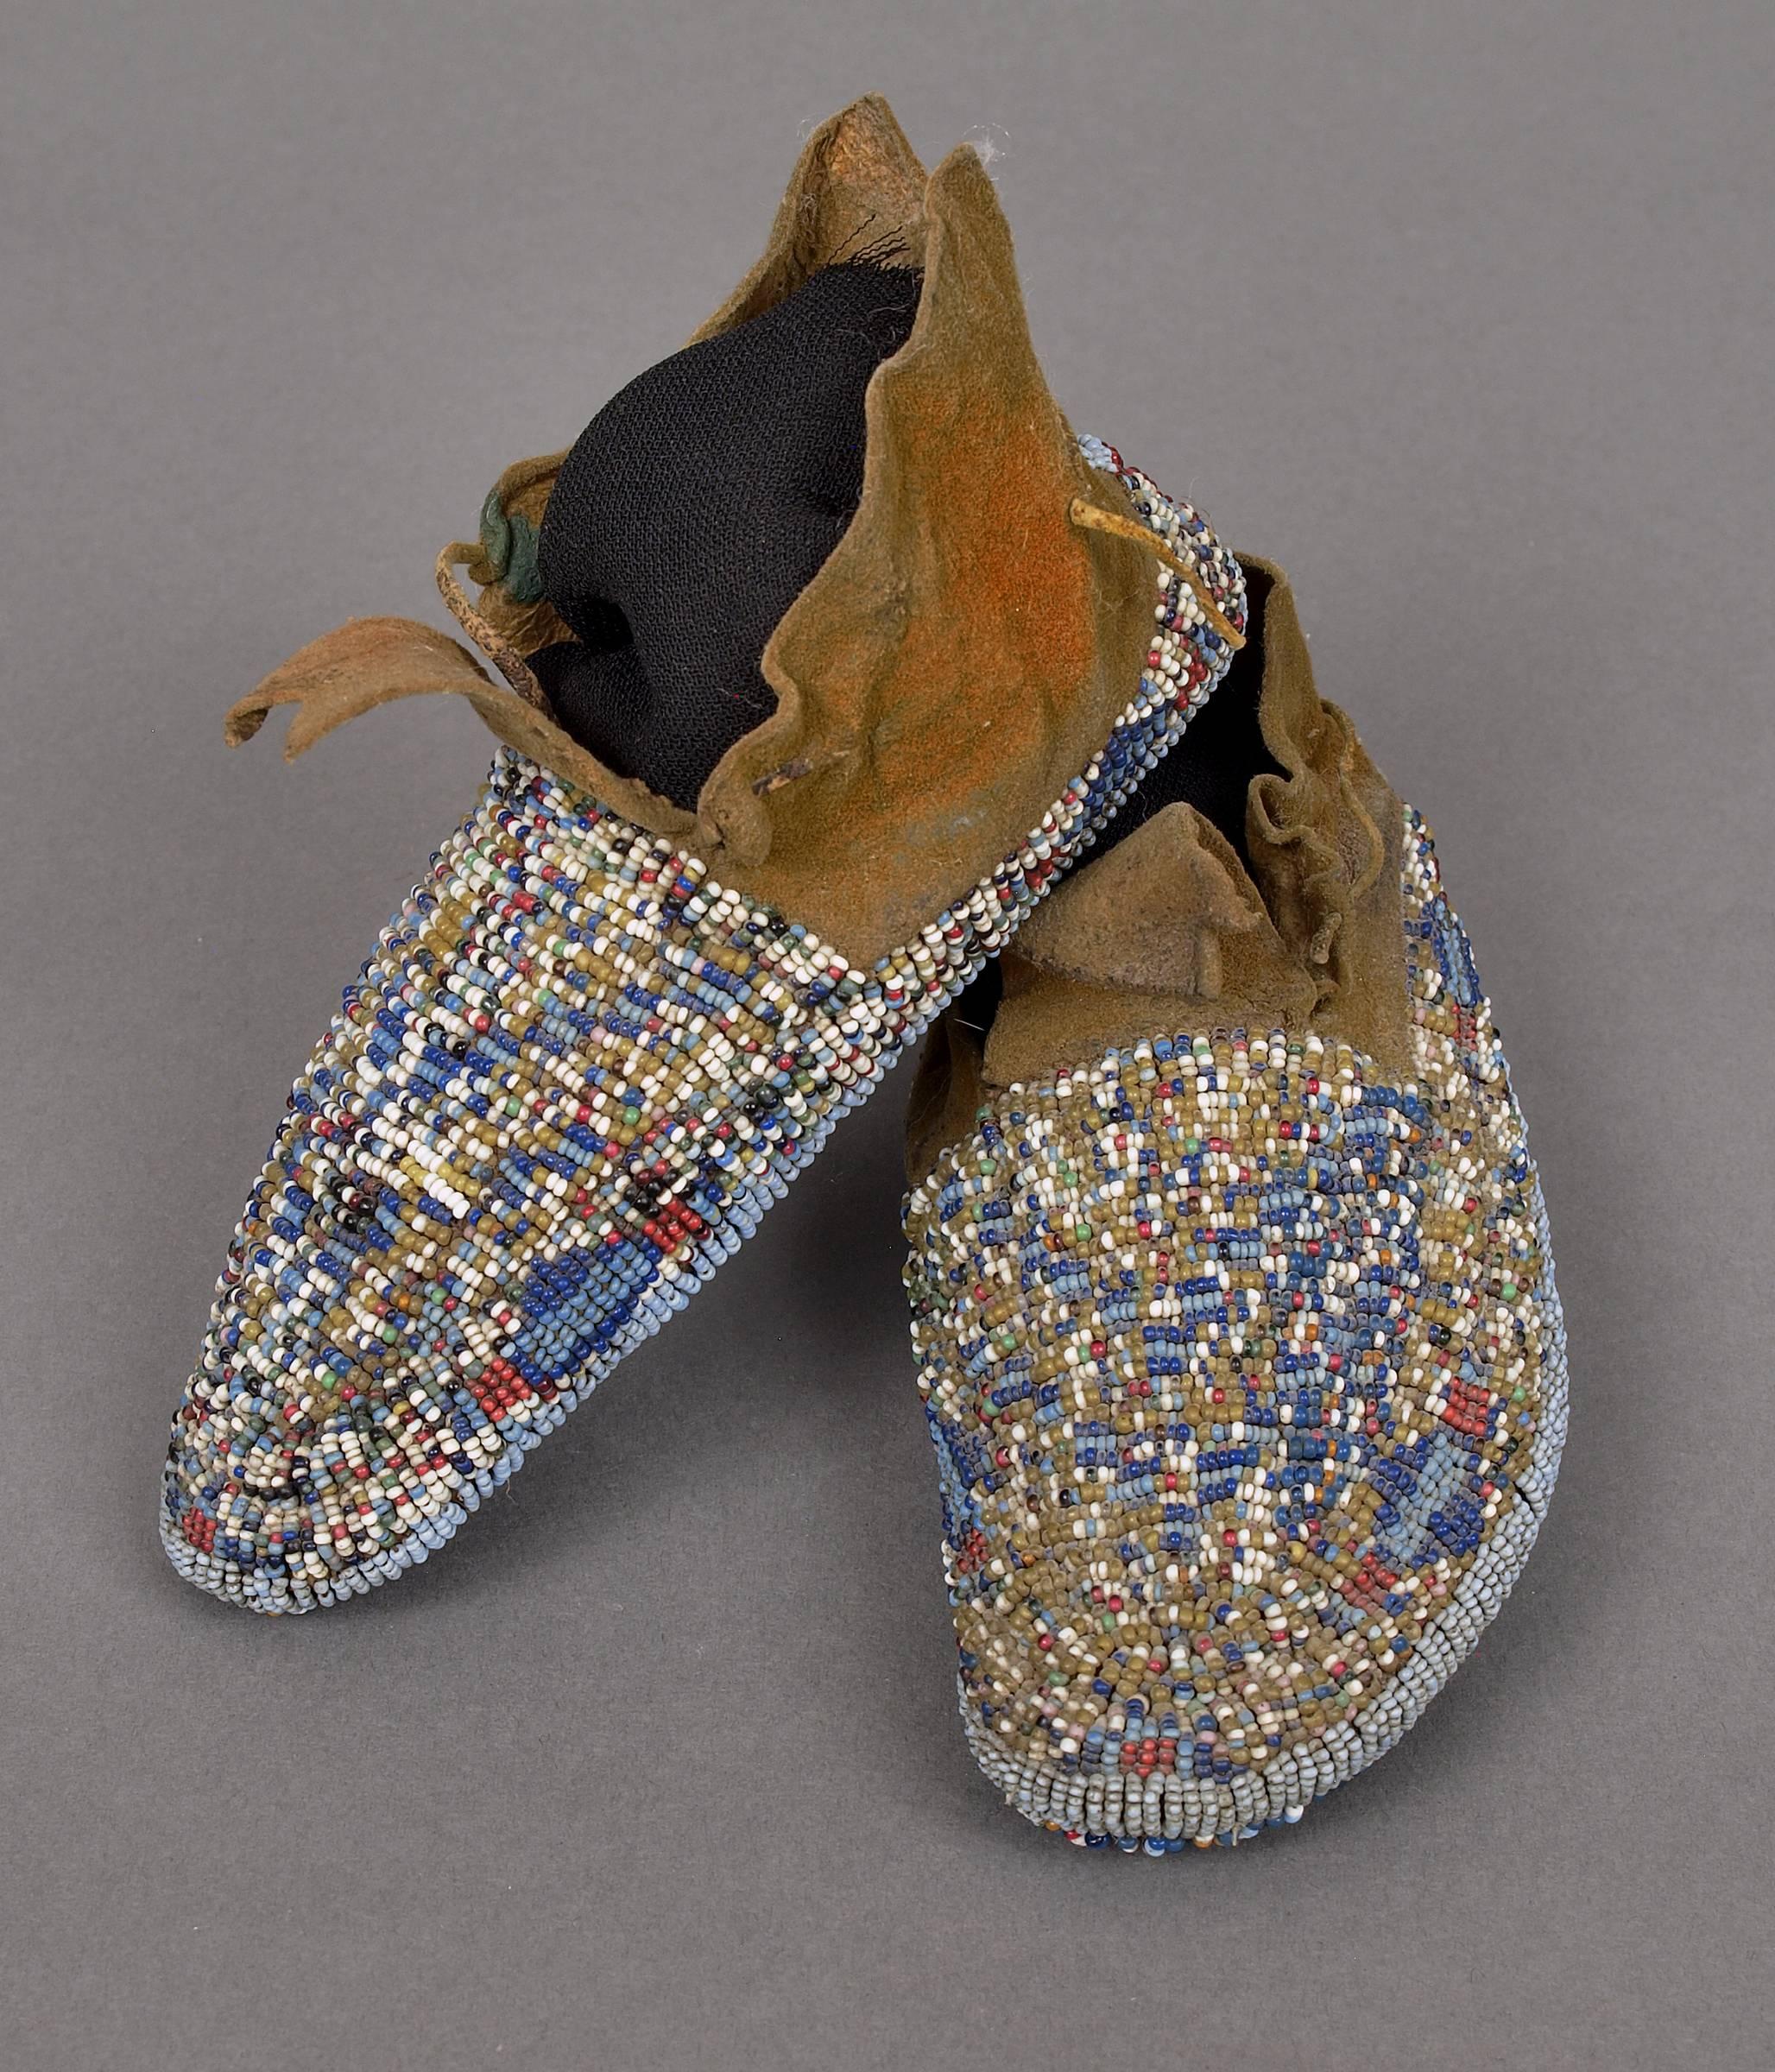 Beaded Antique Native American Child's Ceremonial Moccasins, Cheyenne, circa 1900